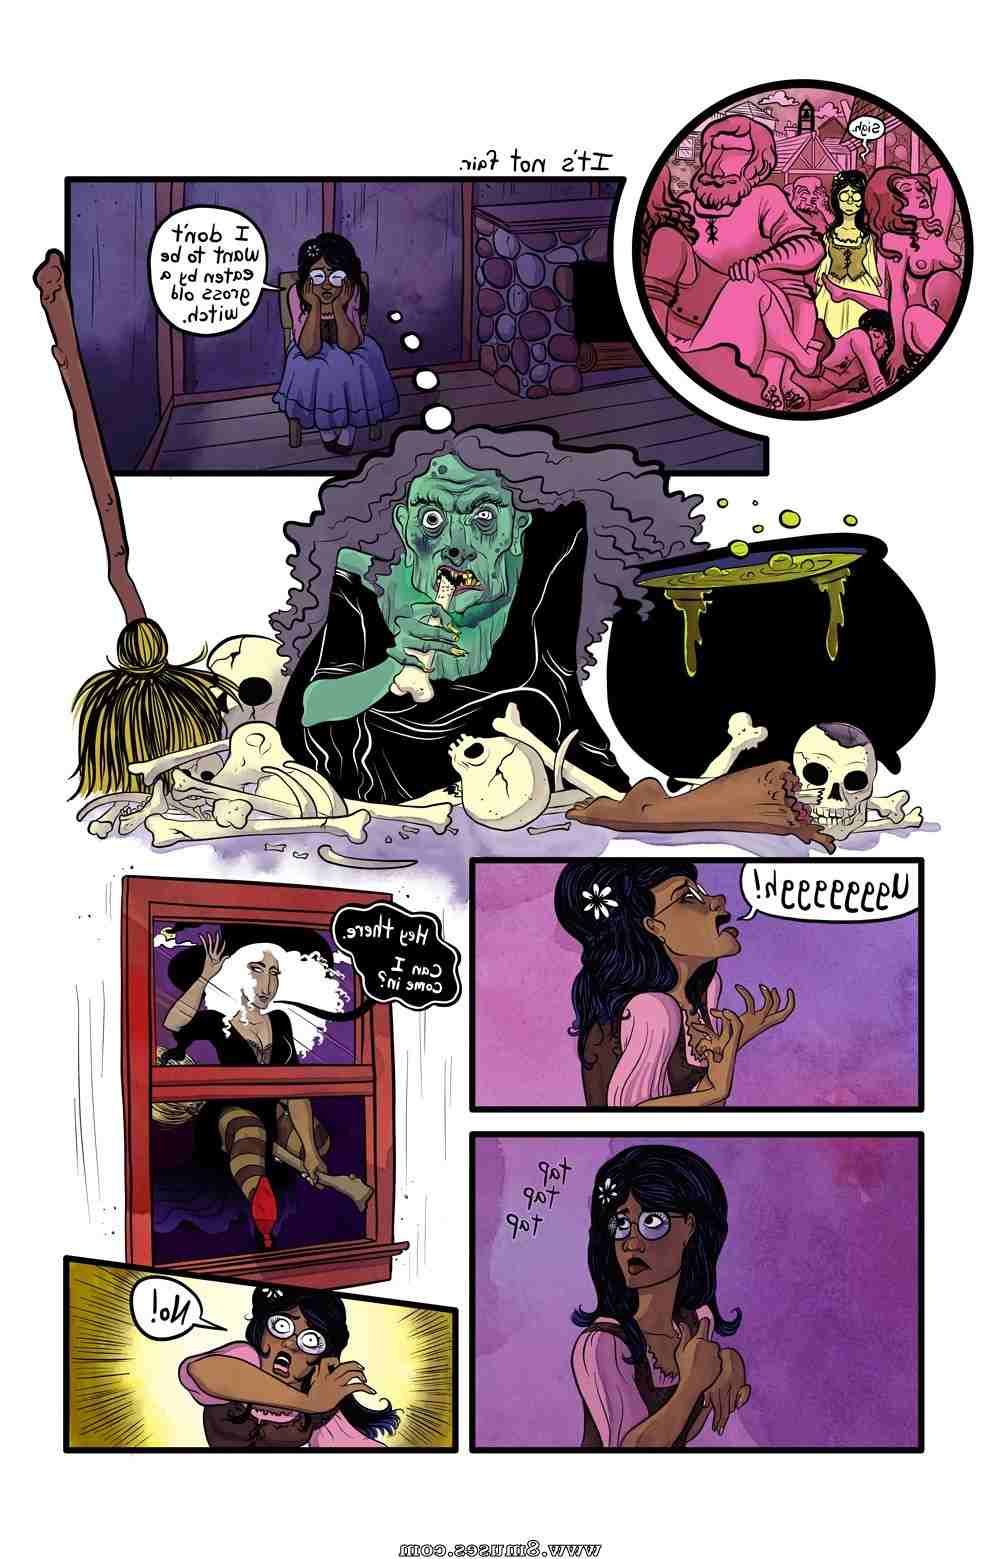 Filthy-Figments-Comics/The-Witch The_Witch__8muses_-_Sex_and_Porn_Comics_4.jpg